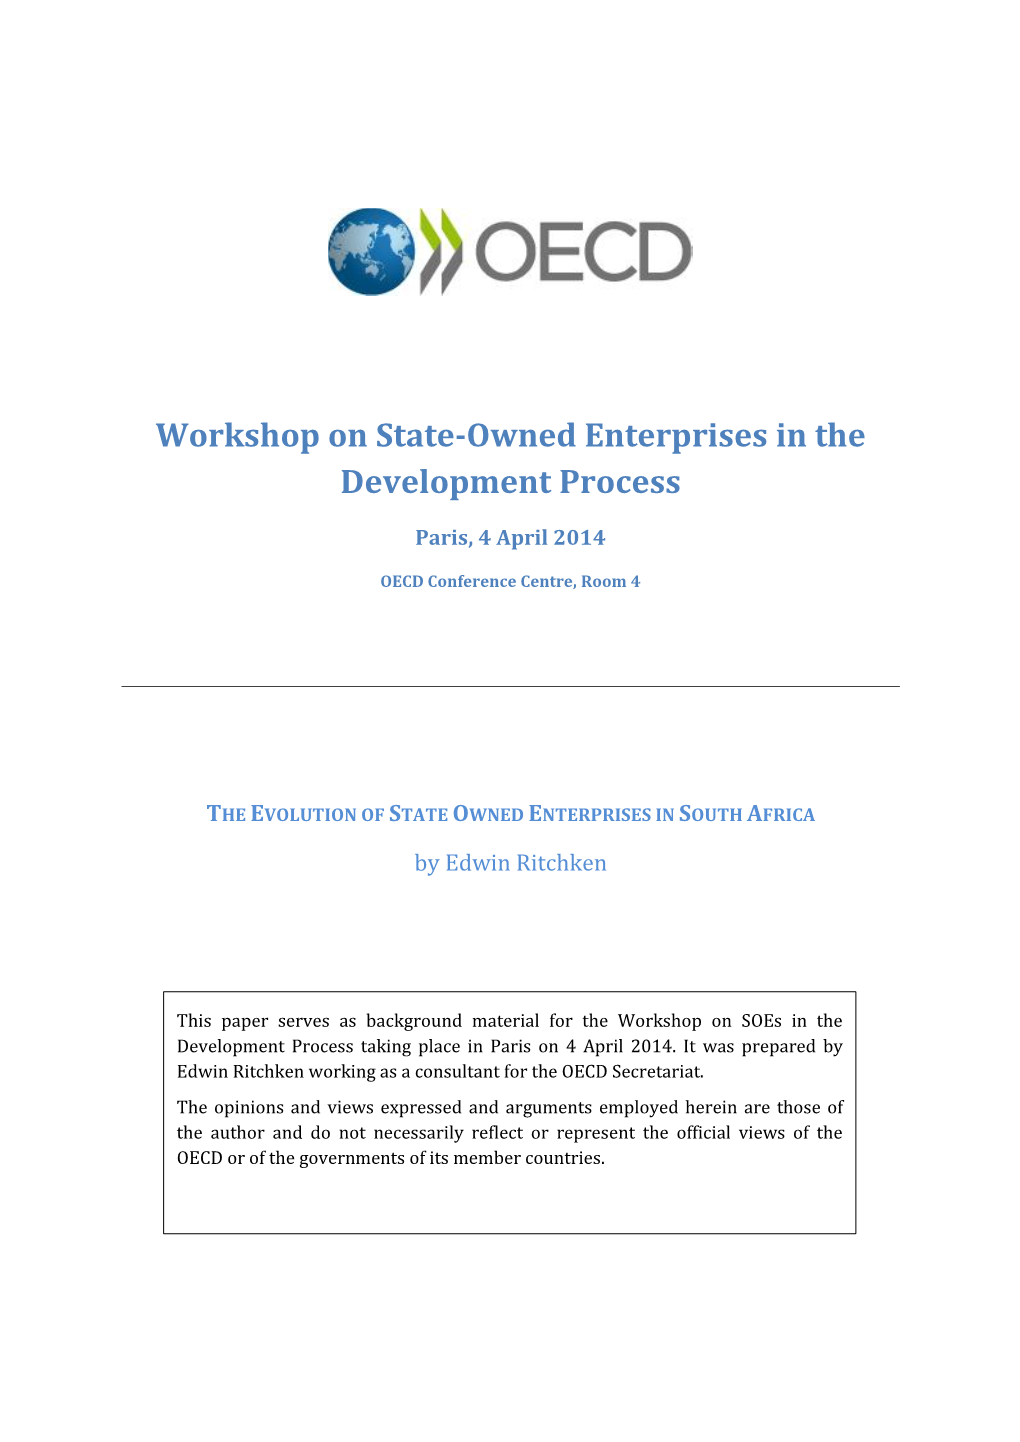 Workshop on State-Owned Enterprises in the Development Process